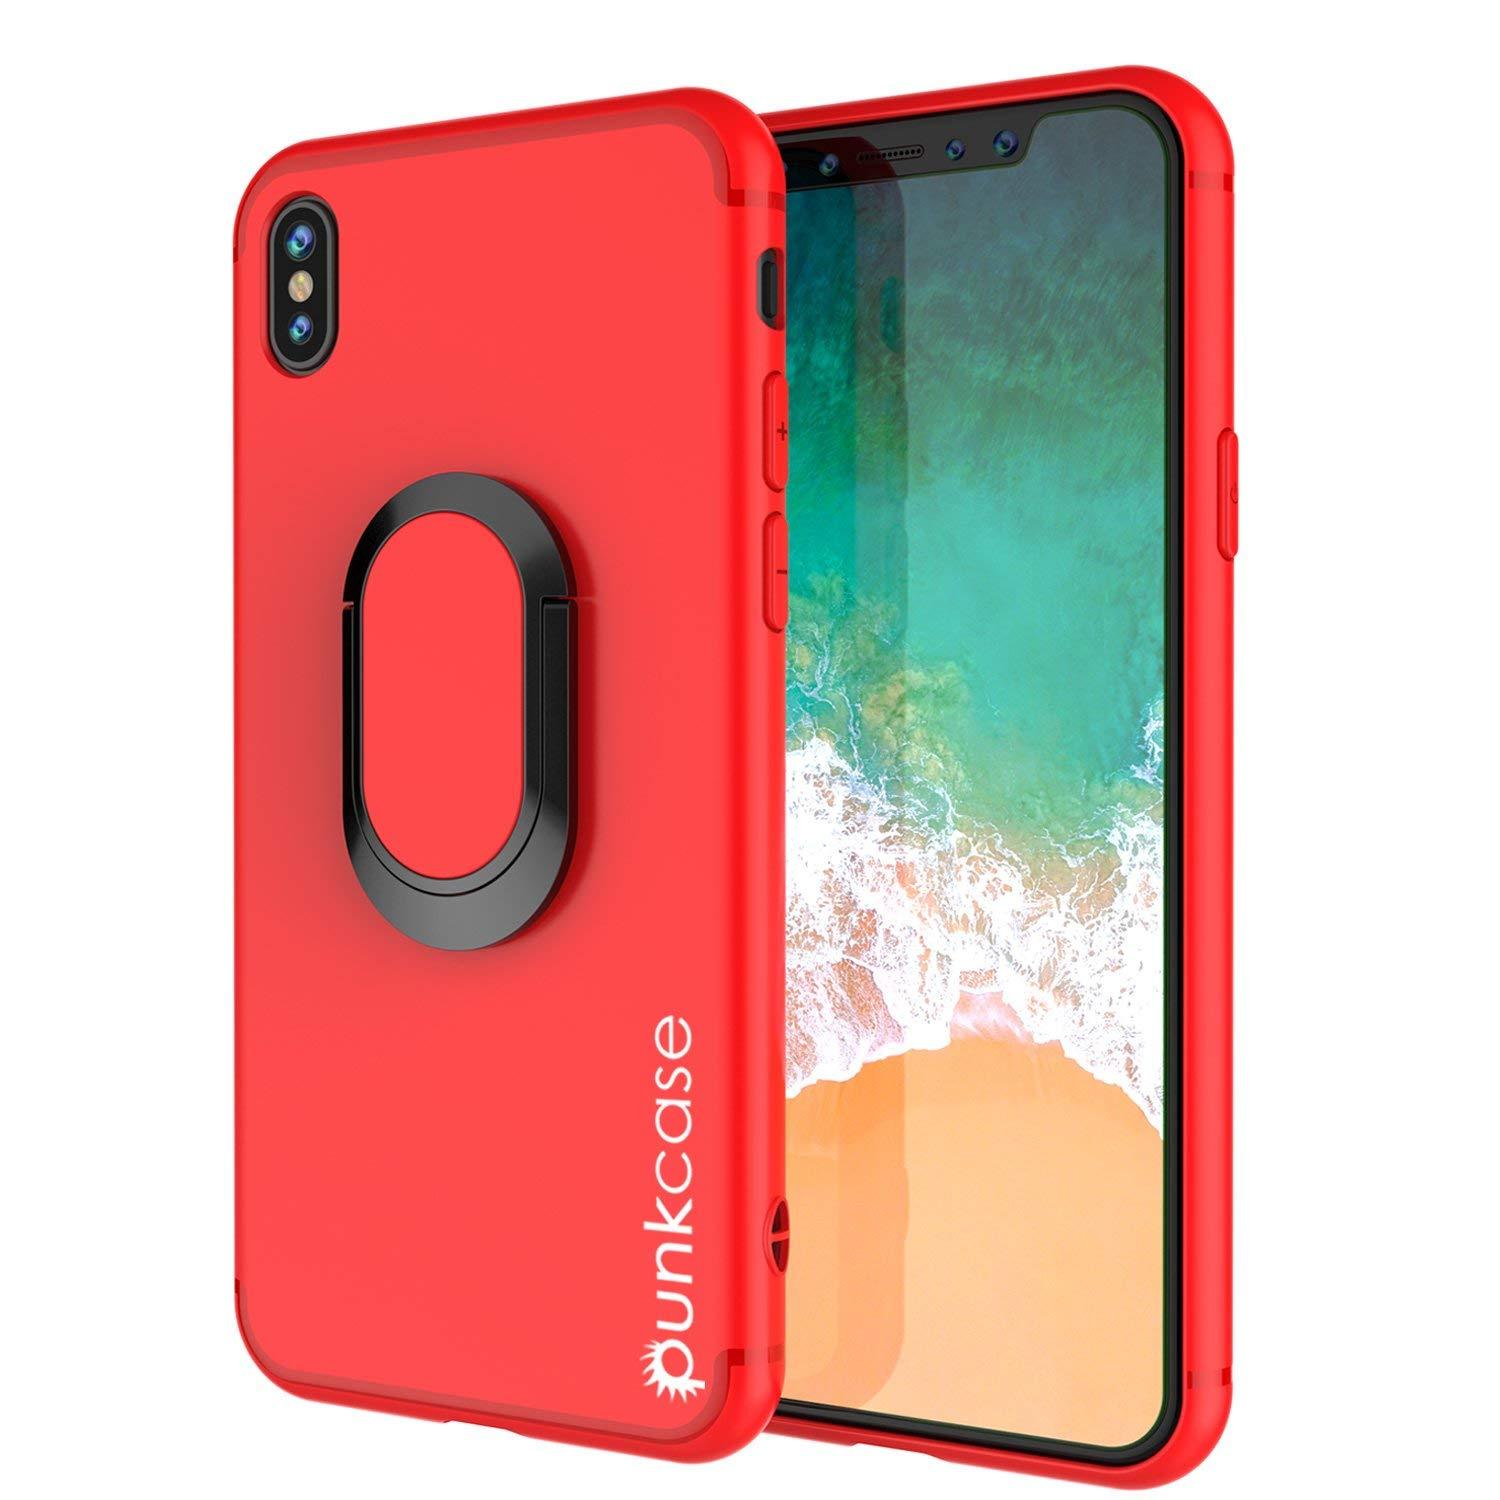 iPhone XR Case, Punkcase Magnetix Protective TPU Cover W/ Kickstand, Tempered Glass Screen Protector [Red]